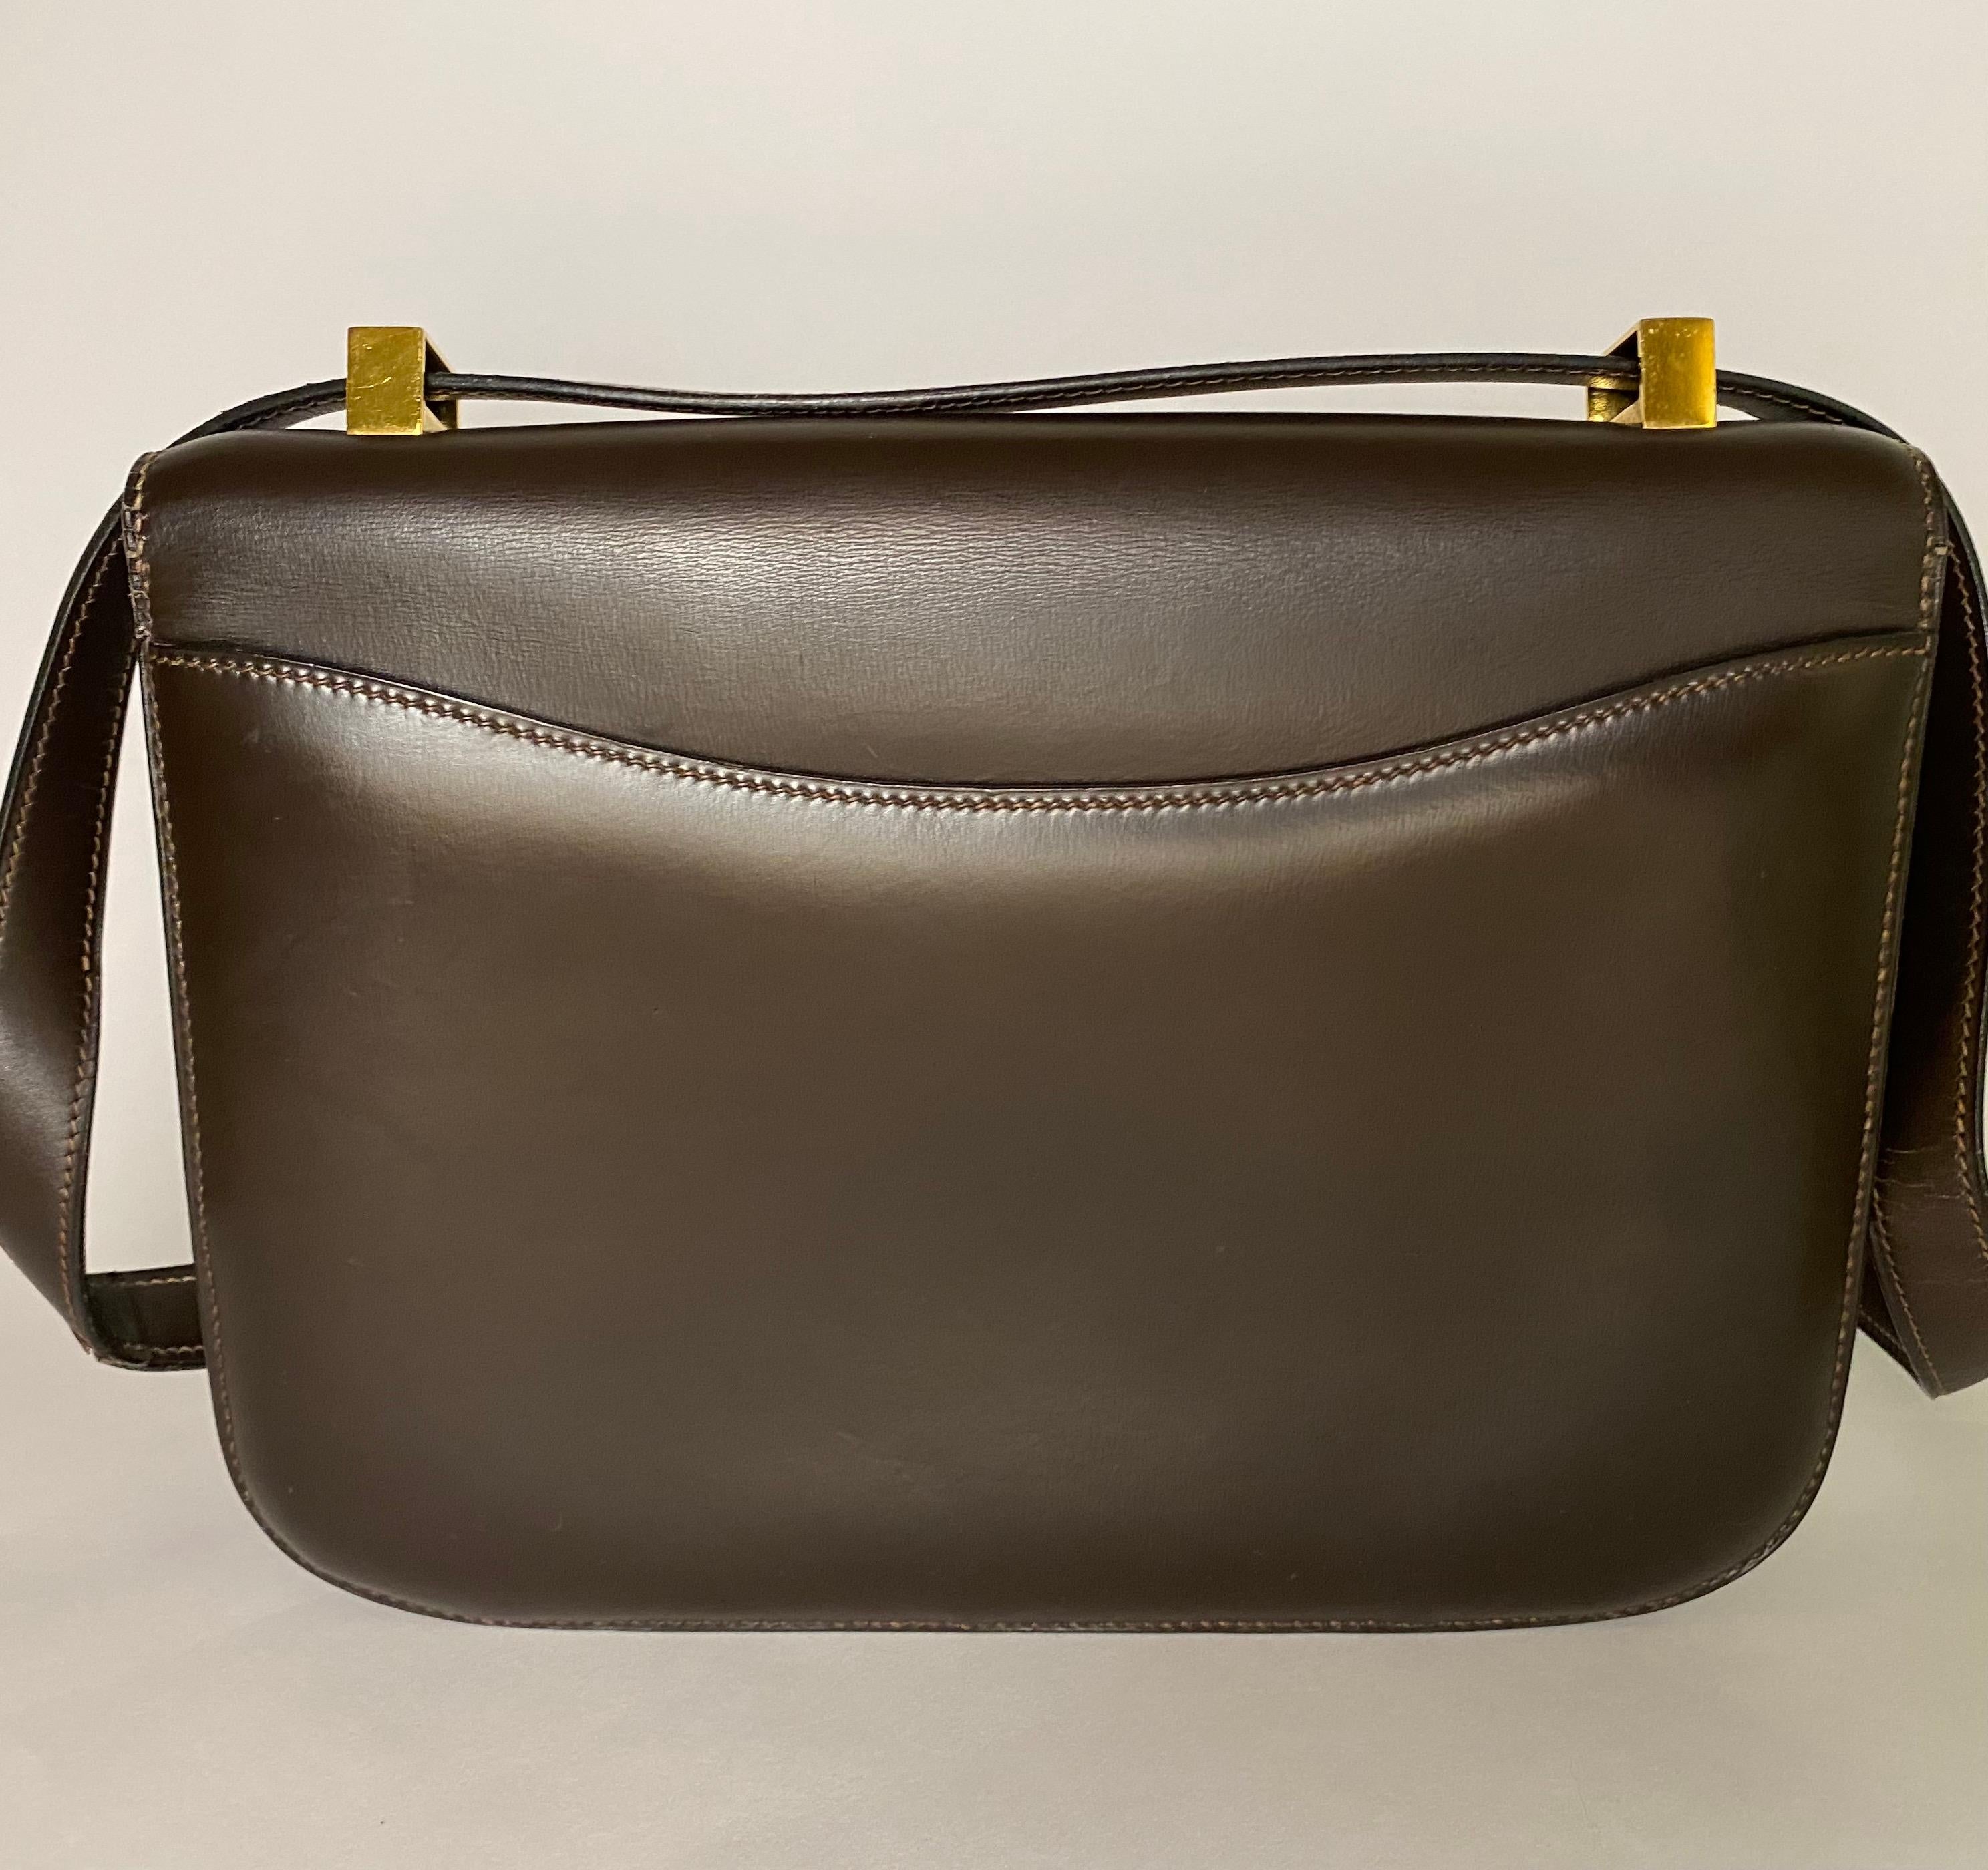 Made with brown box calf leather and gold plated hardware. Produced in 1985. 

Condition: Good used condition.
Exterior: One exterior pocket, light scratching on hardware and leather as to be expected with use, light cracking on strap.
Interior: One